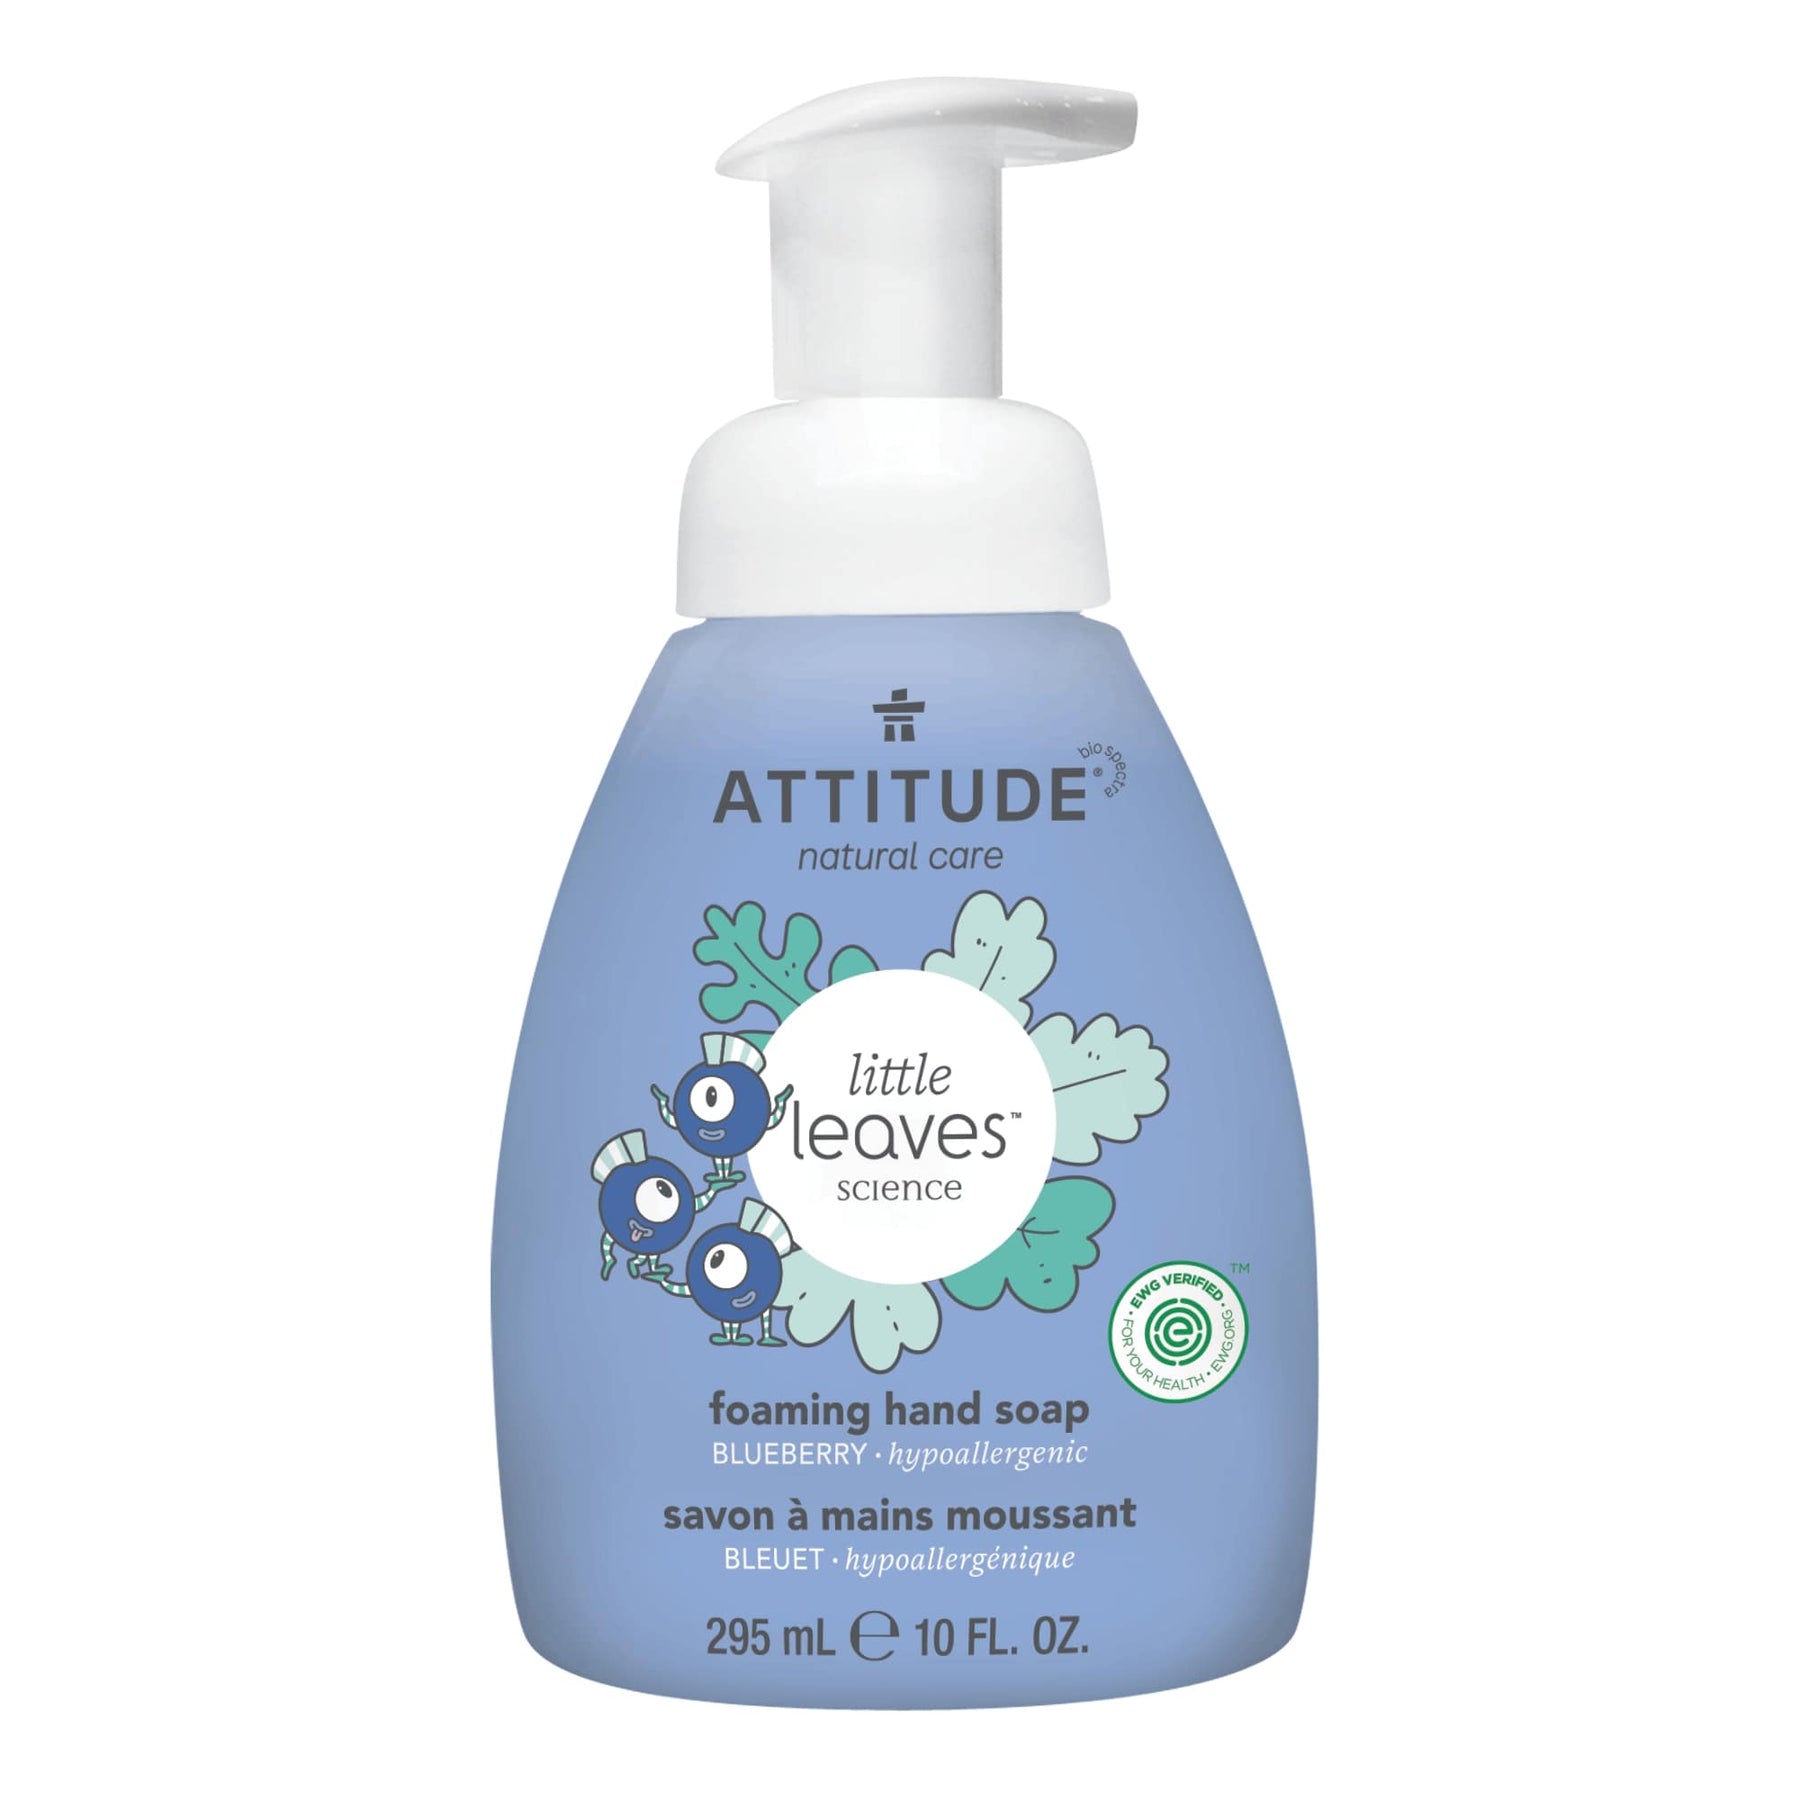 Foaming Hand Soap for Kids : LITTLE LEAVES™ - Blueberry - by Attitude |ProCare Outlet|